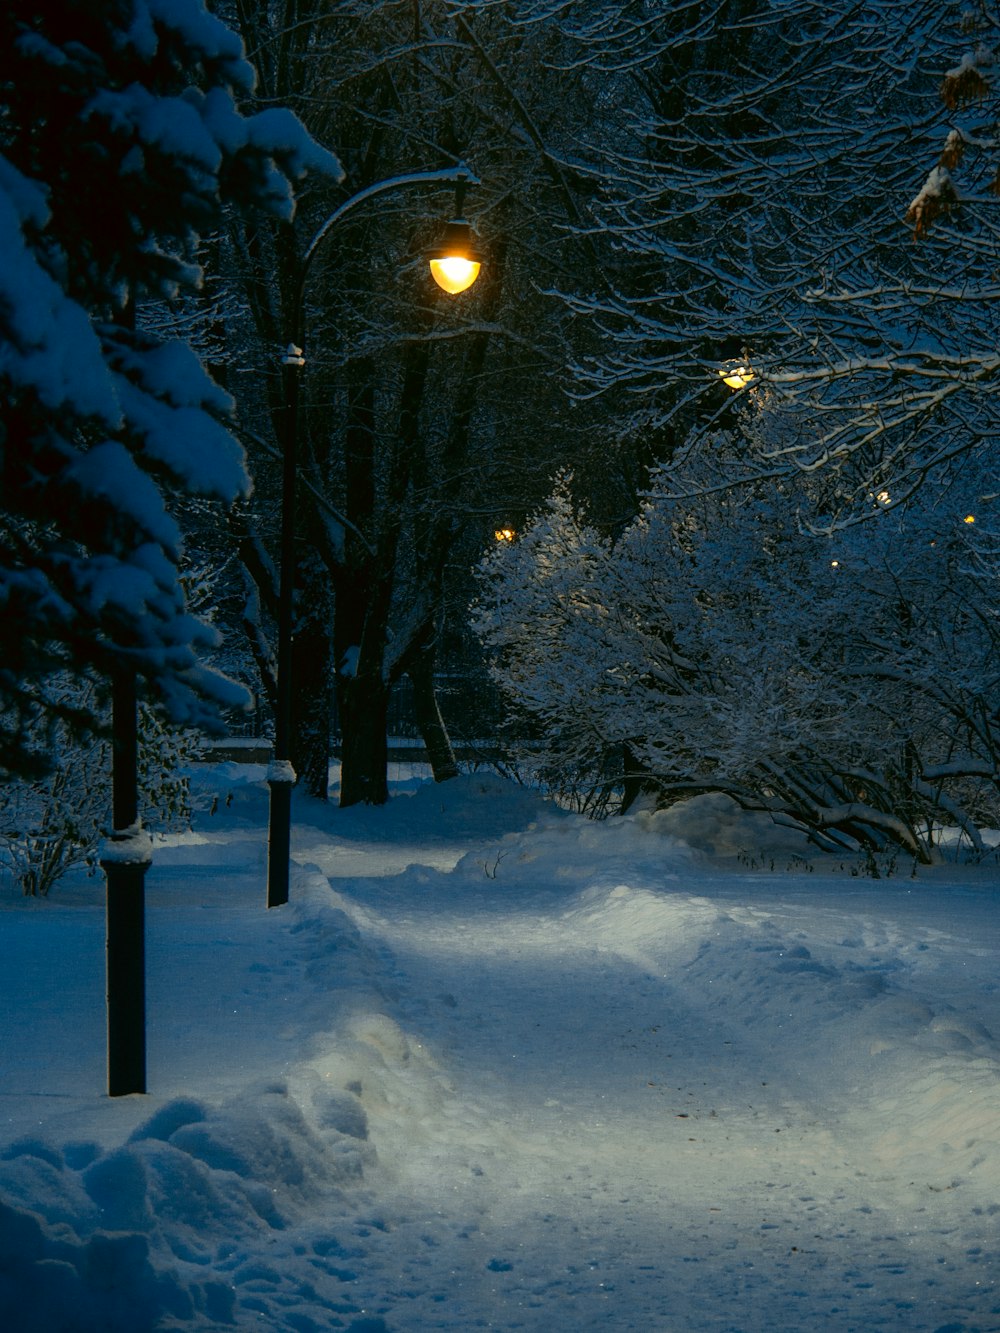 a snowy path with a street light in the distance